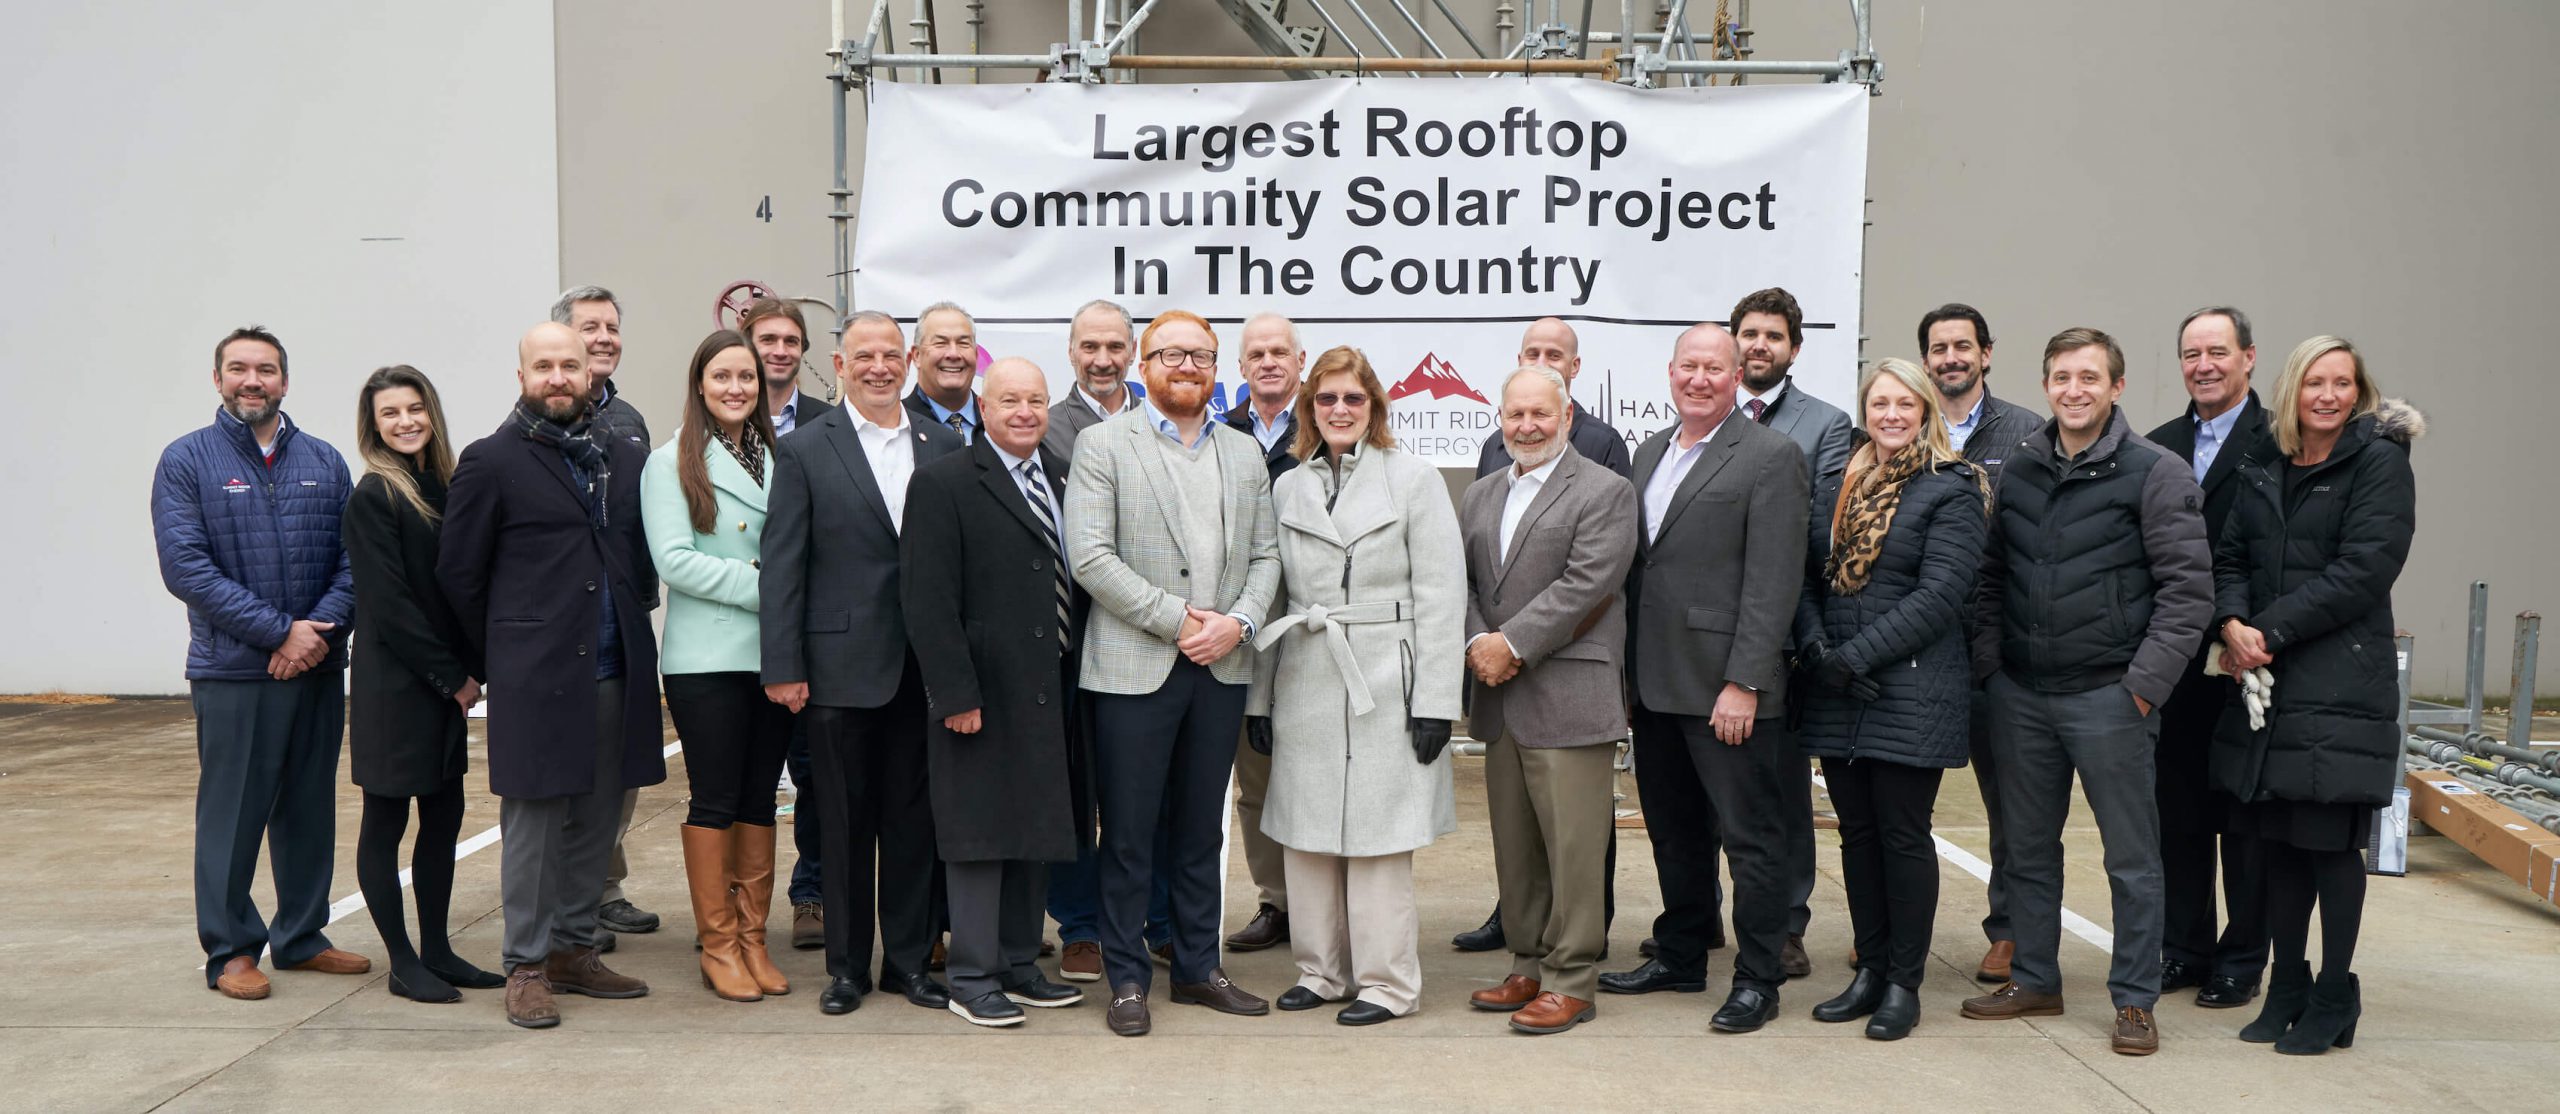 Summit Ridge Energy Holds Ribbon Cutting for Nation’s Largest Rooftop Community Solar Array